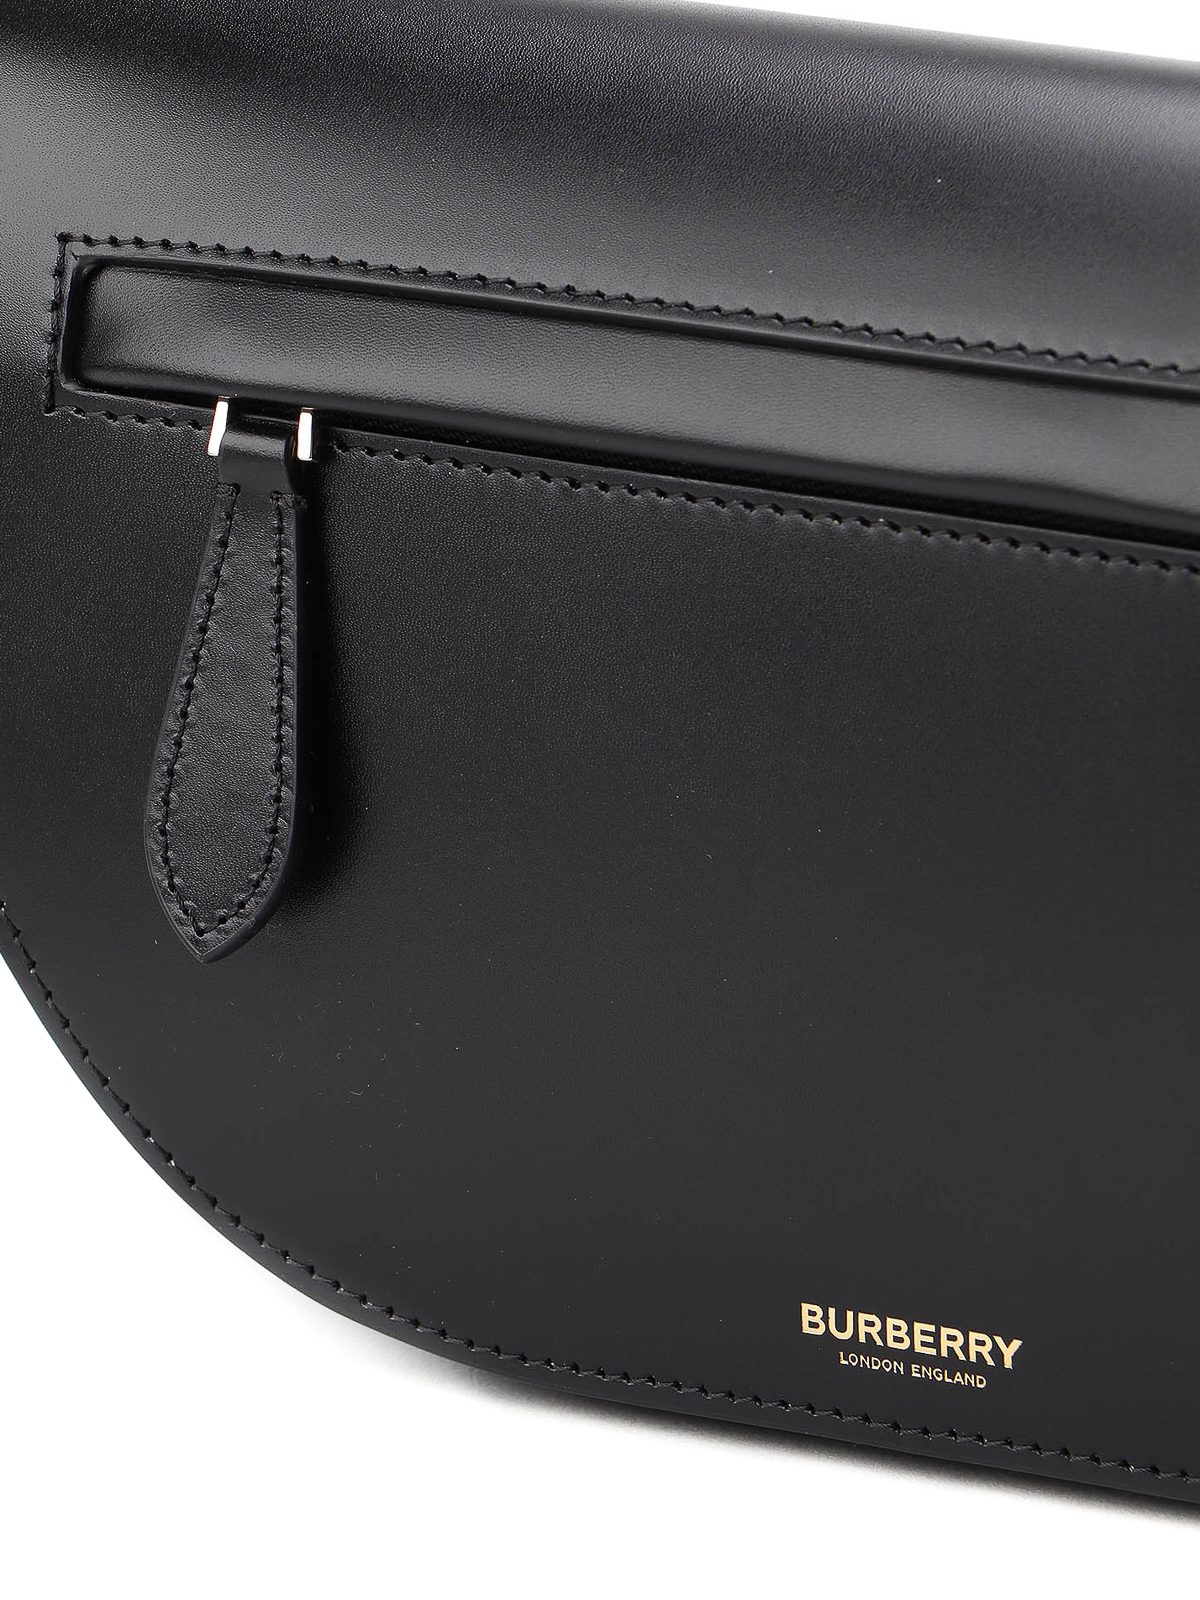 Burberry's New Olympia Bag and the Saddle Bag Trend